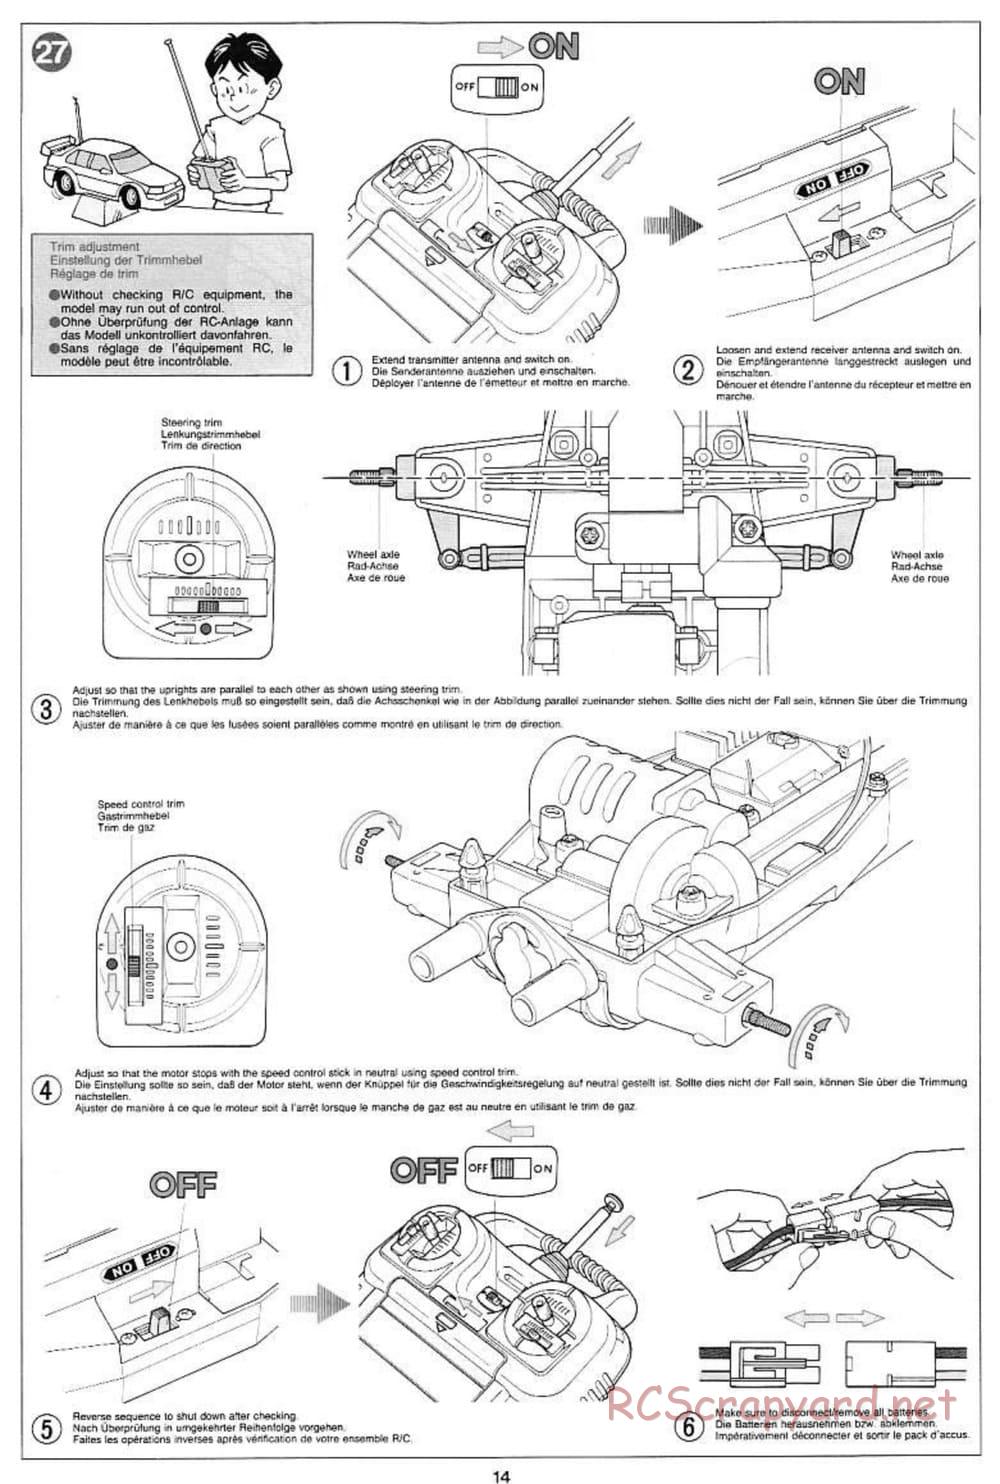 Tamiya - Voltec Fighter - Boy's 4WD Chassis - Manual - Page 14